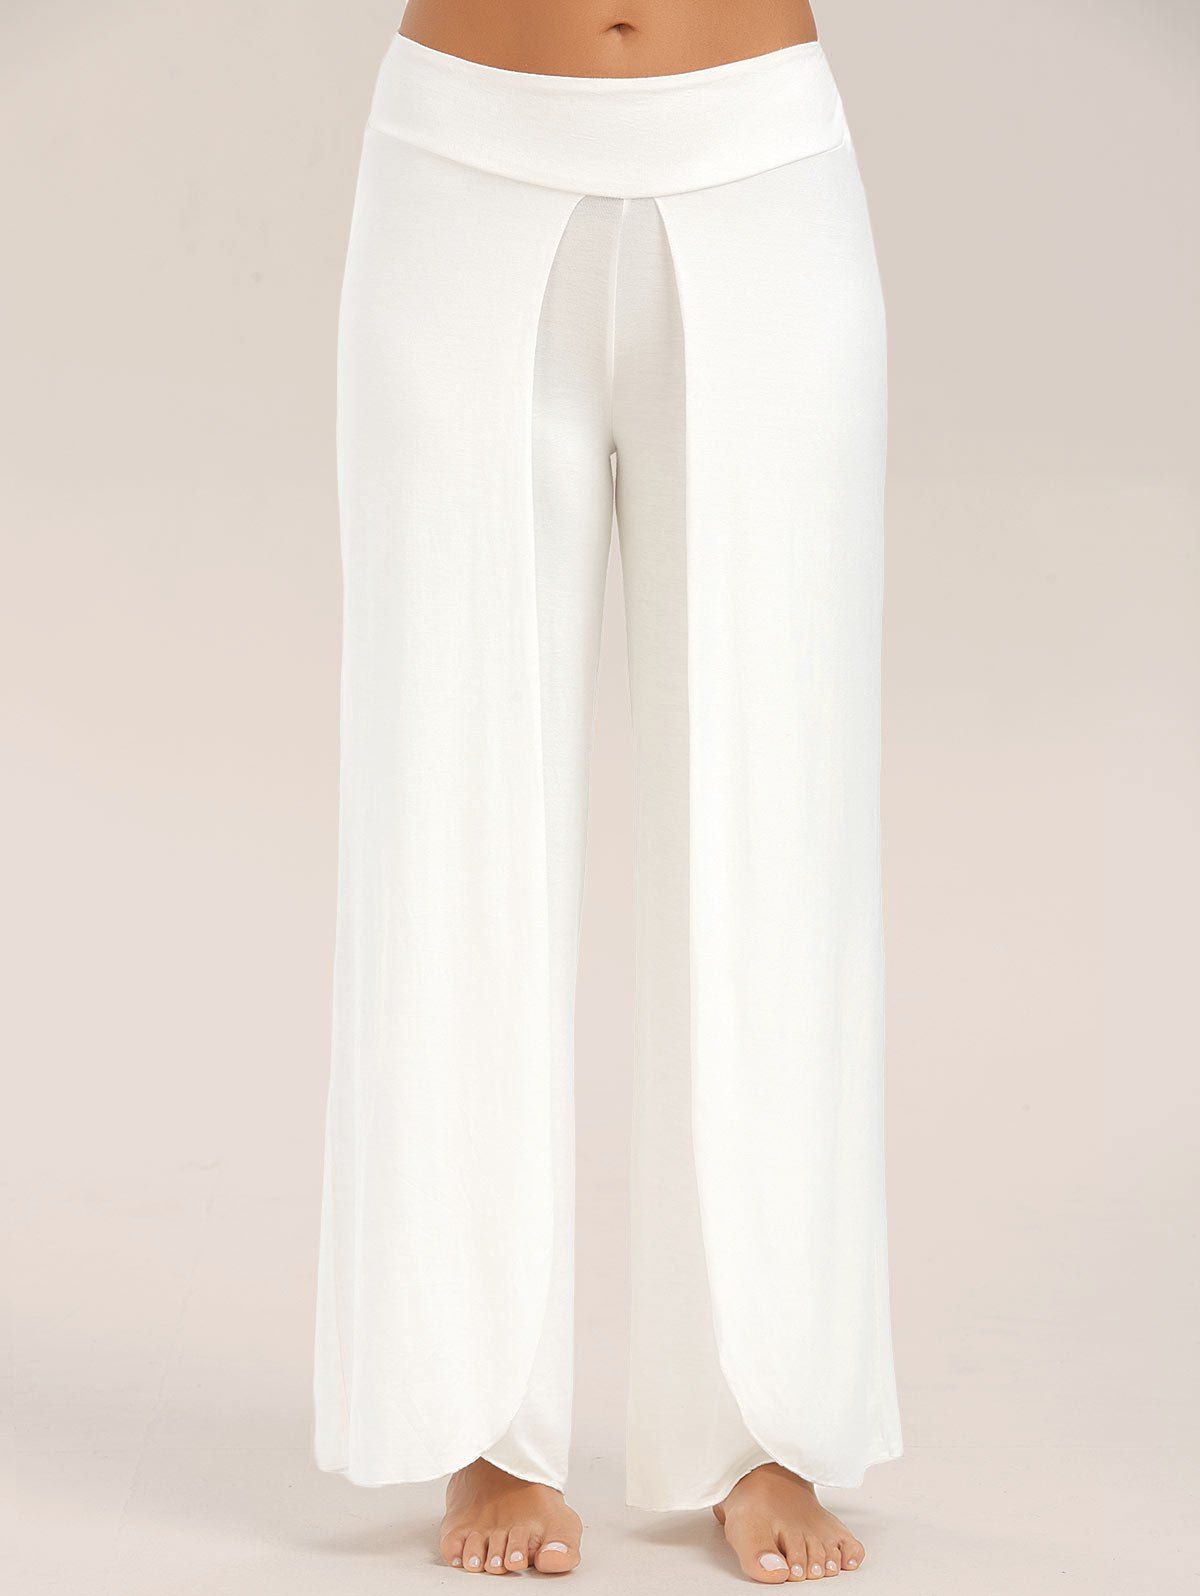 2018 High Slit Palazzo Pants WHITE M In Pants Online Store. Best High ...